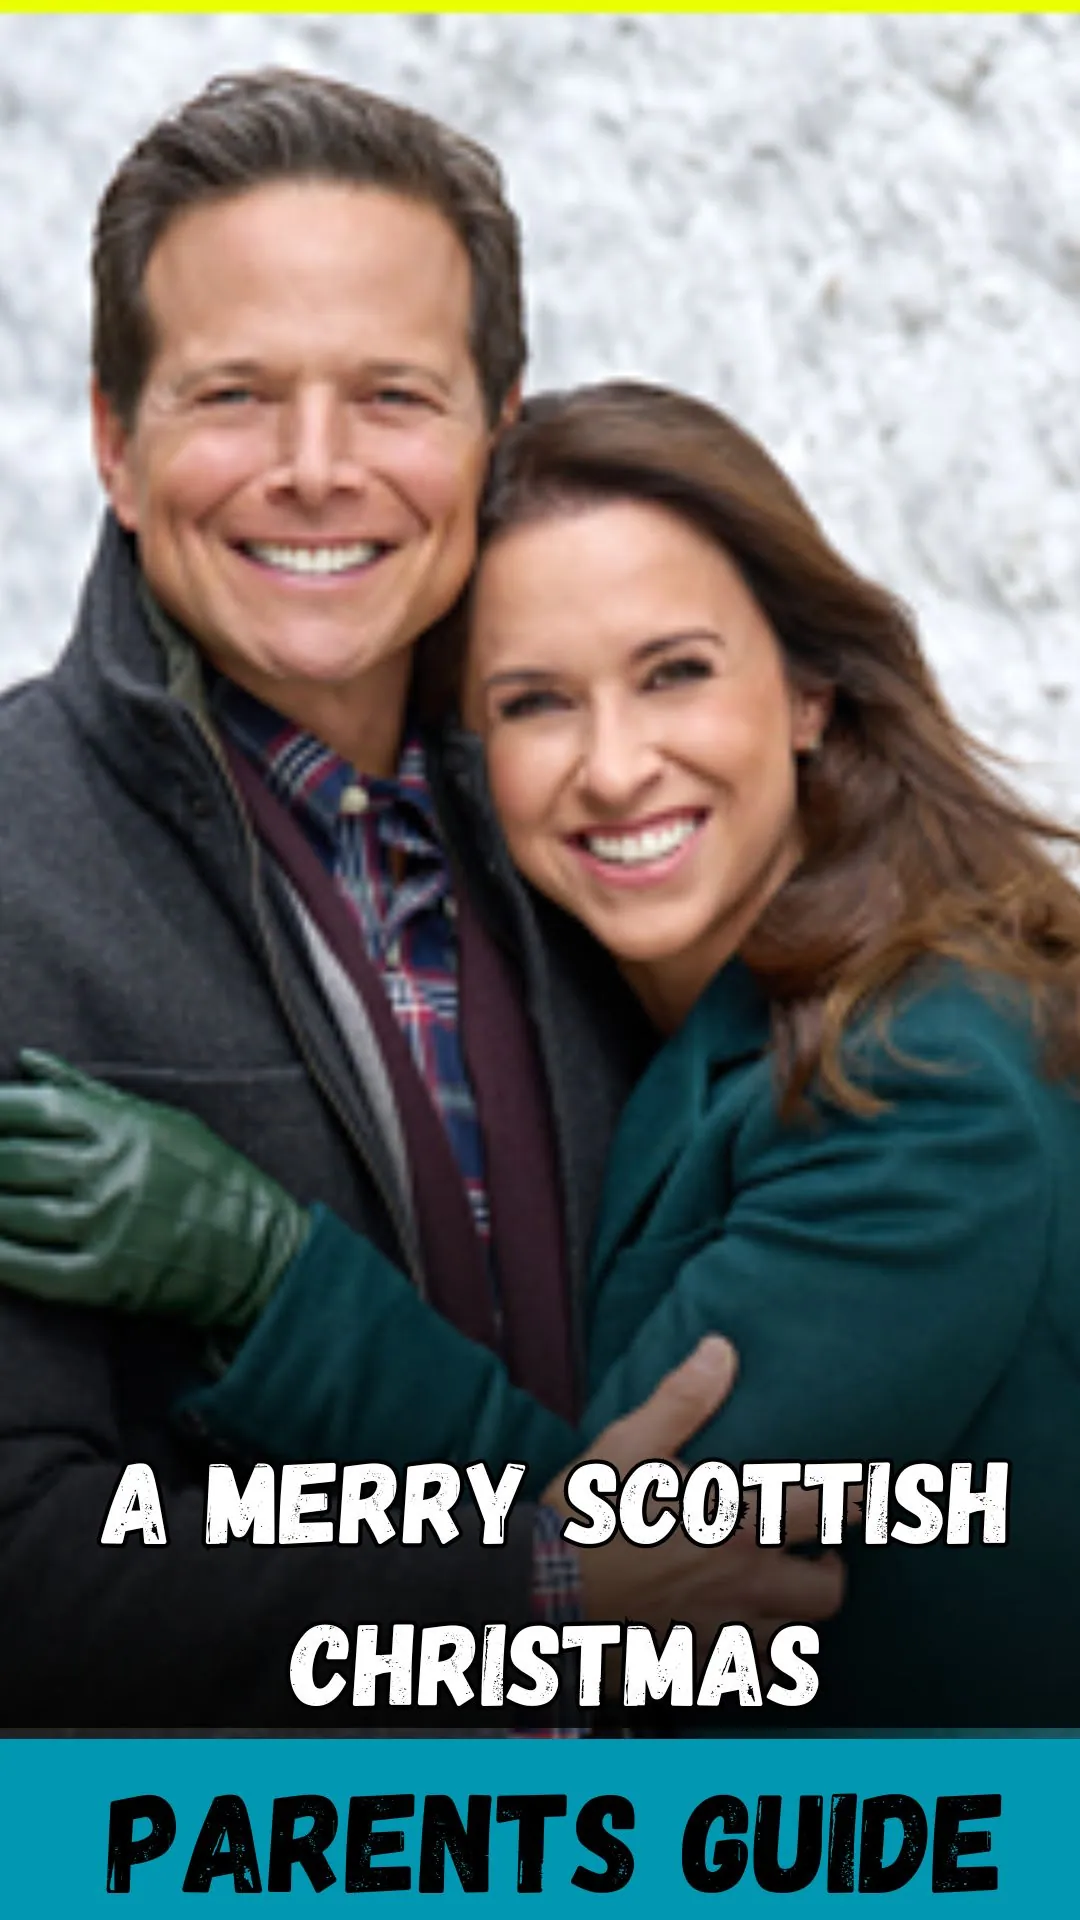 A Merry Scottish Christmas Parents Guide (1)